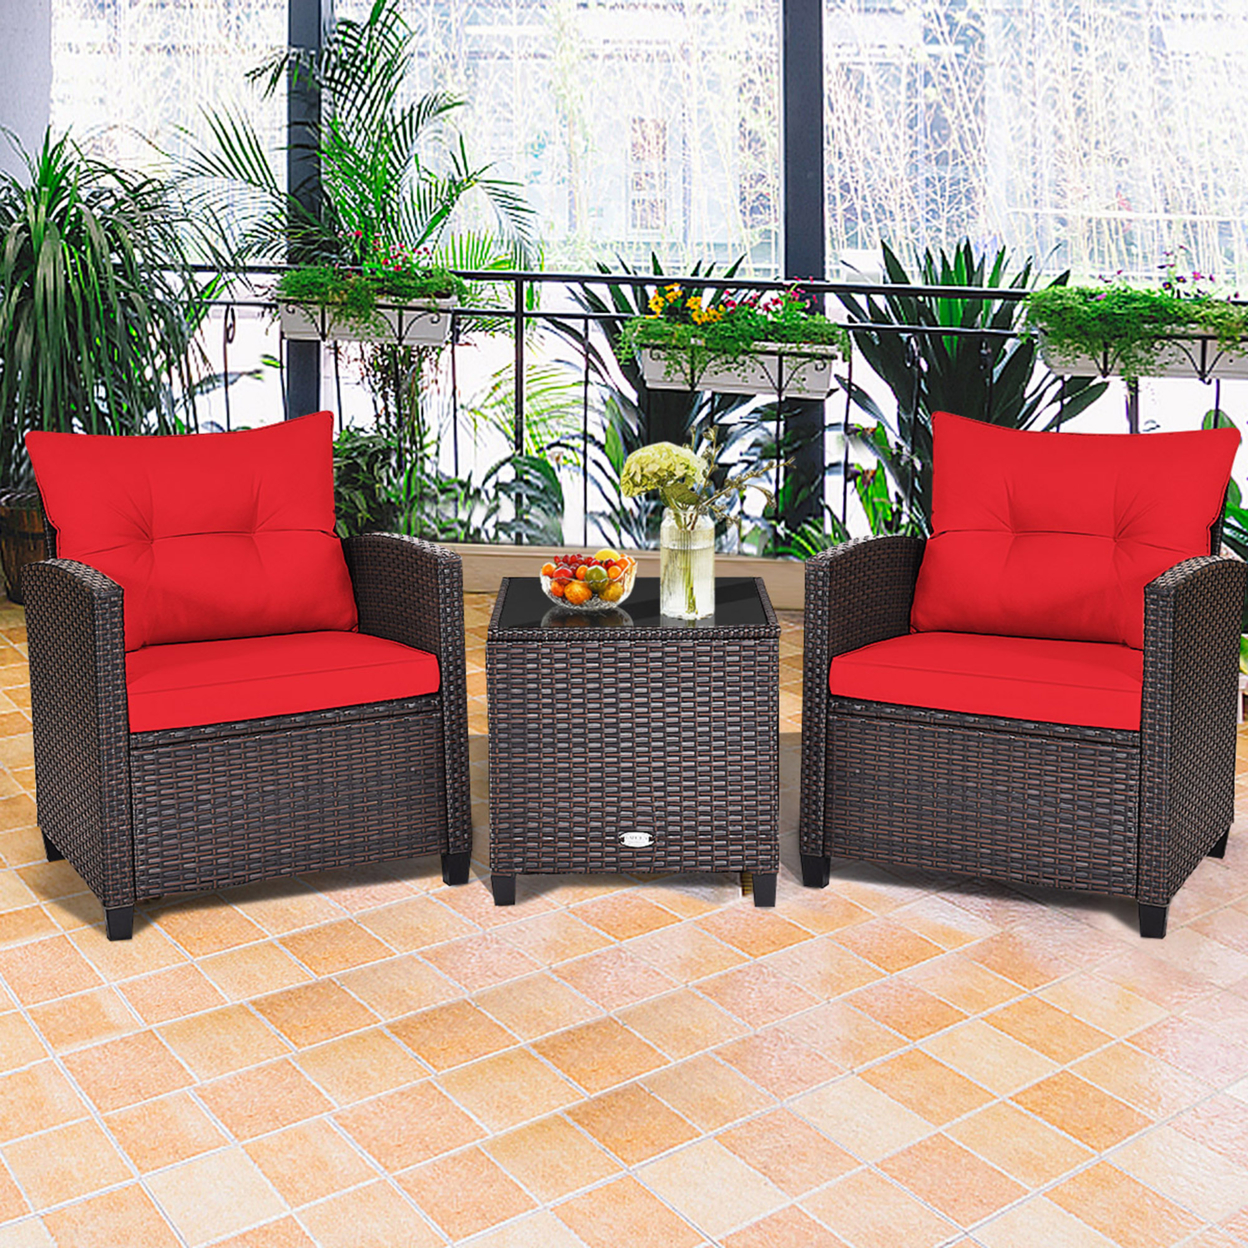 3PCS Outdoor Patio Rattan Conversation Set W/ Coffee Table Red Cushion